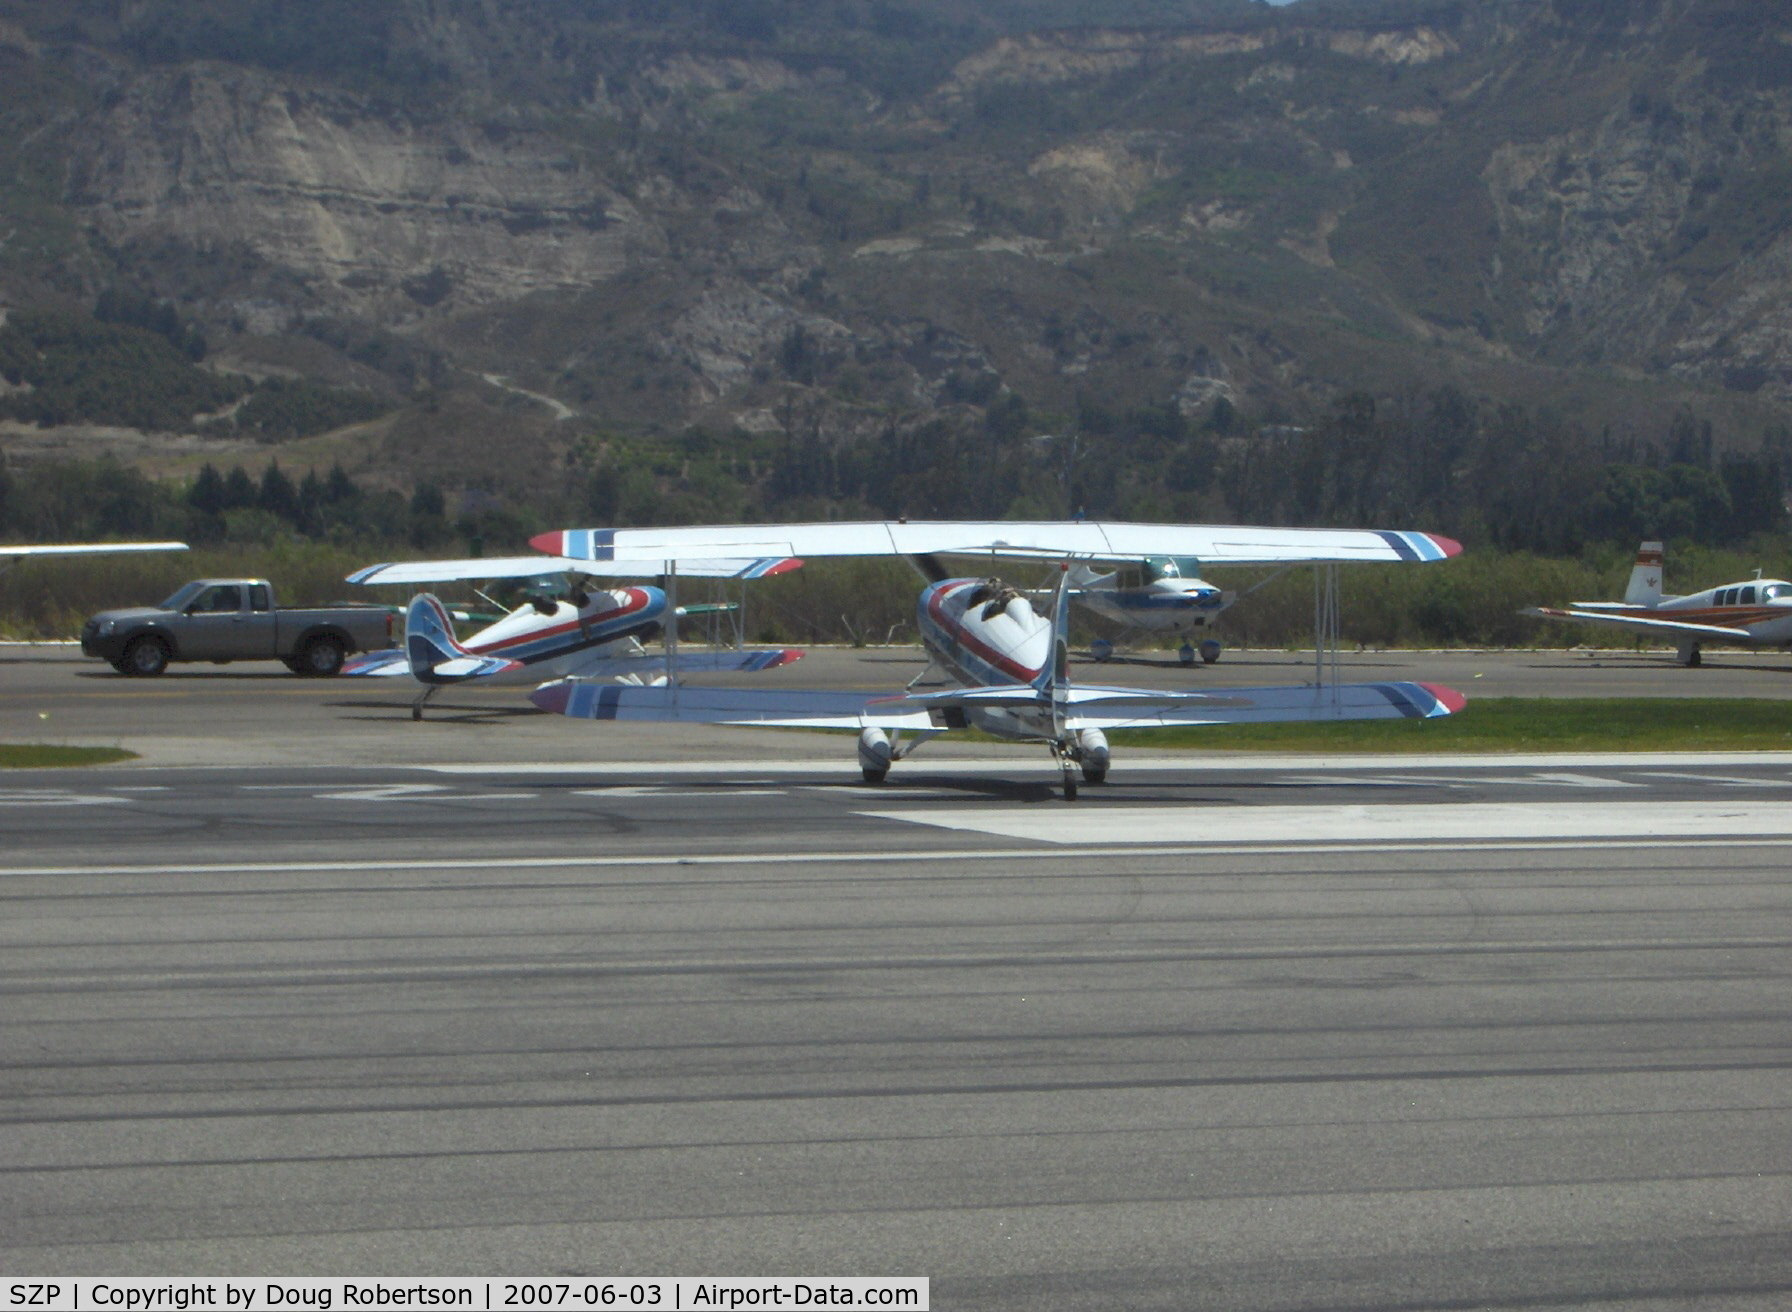 Santa Paula Airport (SZP) - N3617L & N3554L 1978 Great Lakes 2T-1A-2, a matched pair taxiing to transient tiedown